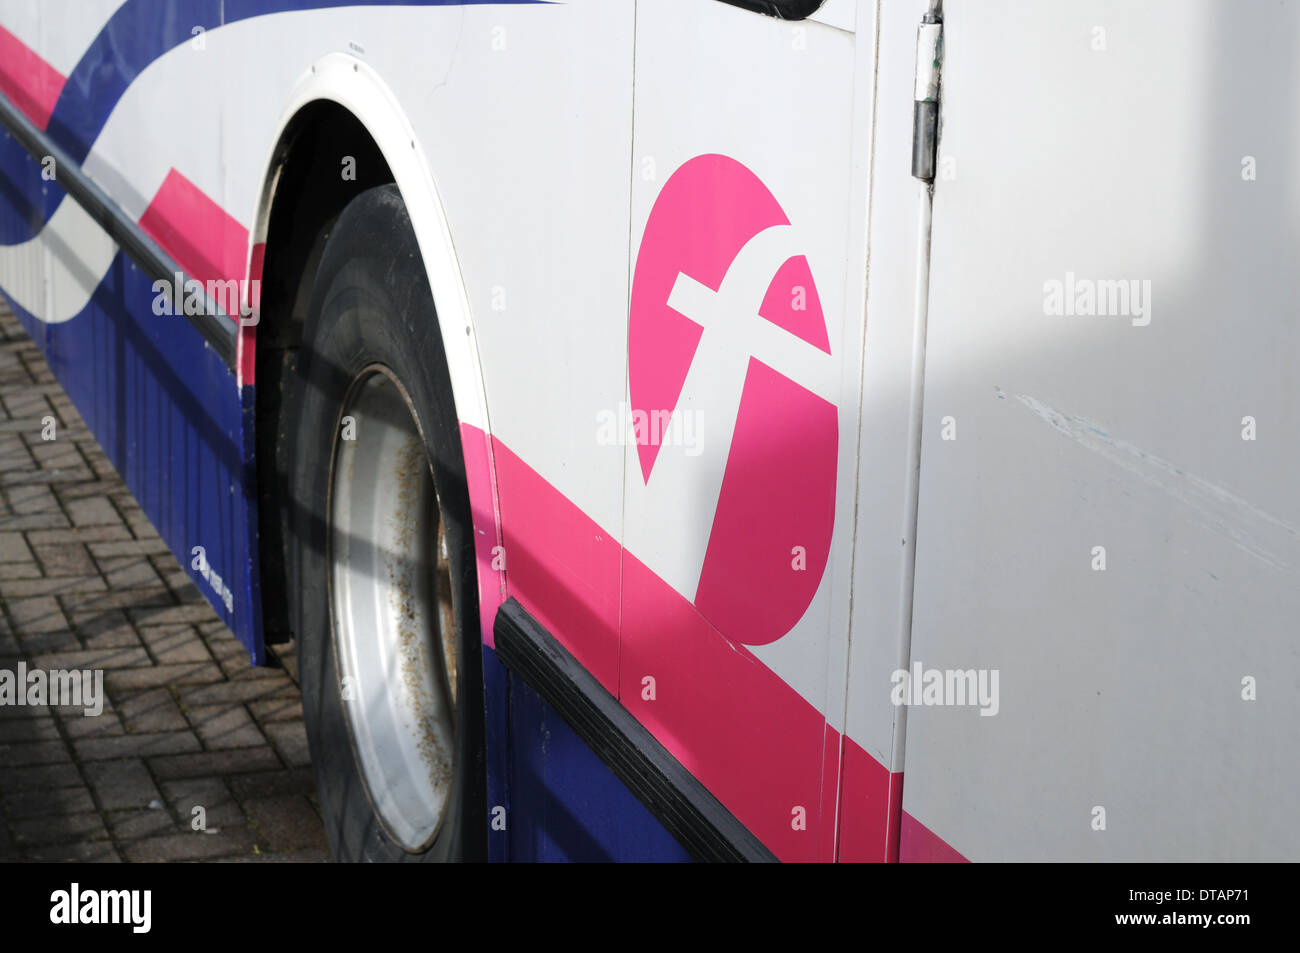 FIRST logo on a double decker bus in Truro, Cornwall Stock Photo